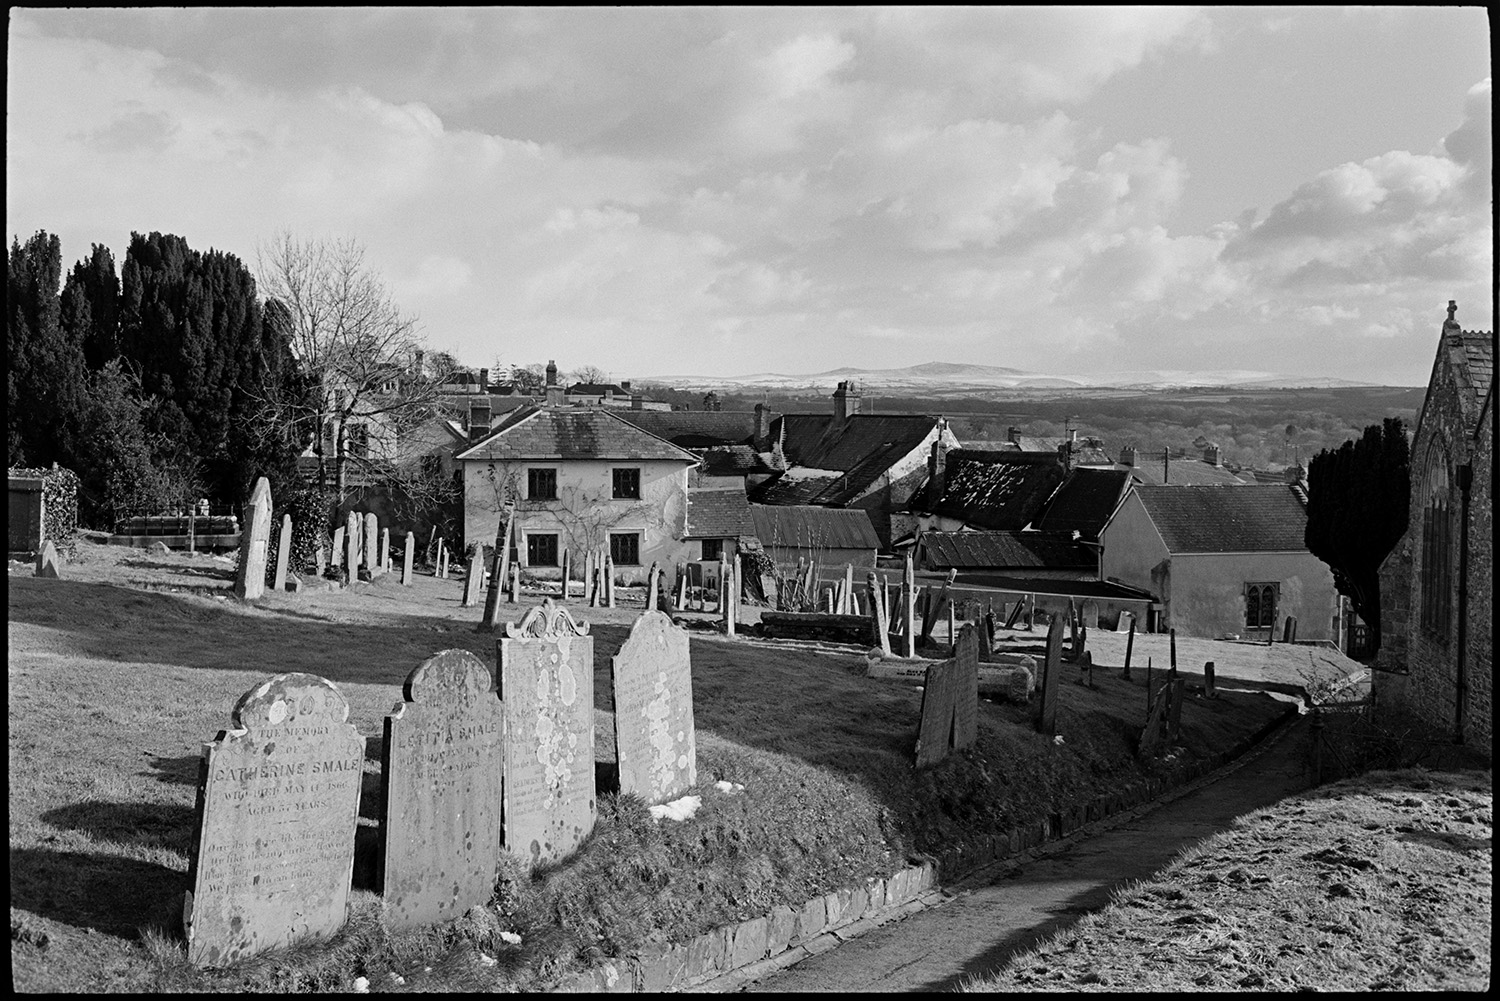 View across graveyard with houses and distant moor. 
[A view of Hatherleigh churchyard with gravestones and the church path. Houses and rooftops can be seen in the background and Dartmoor is visible on the horizon.]